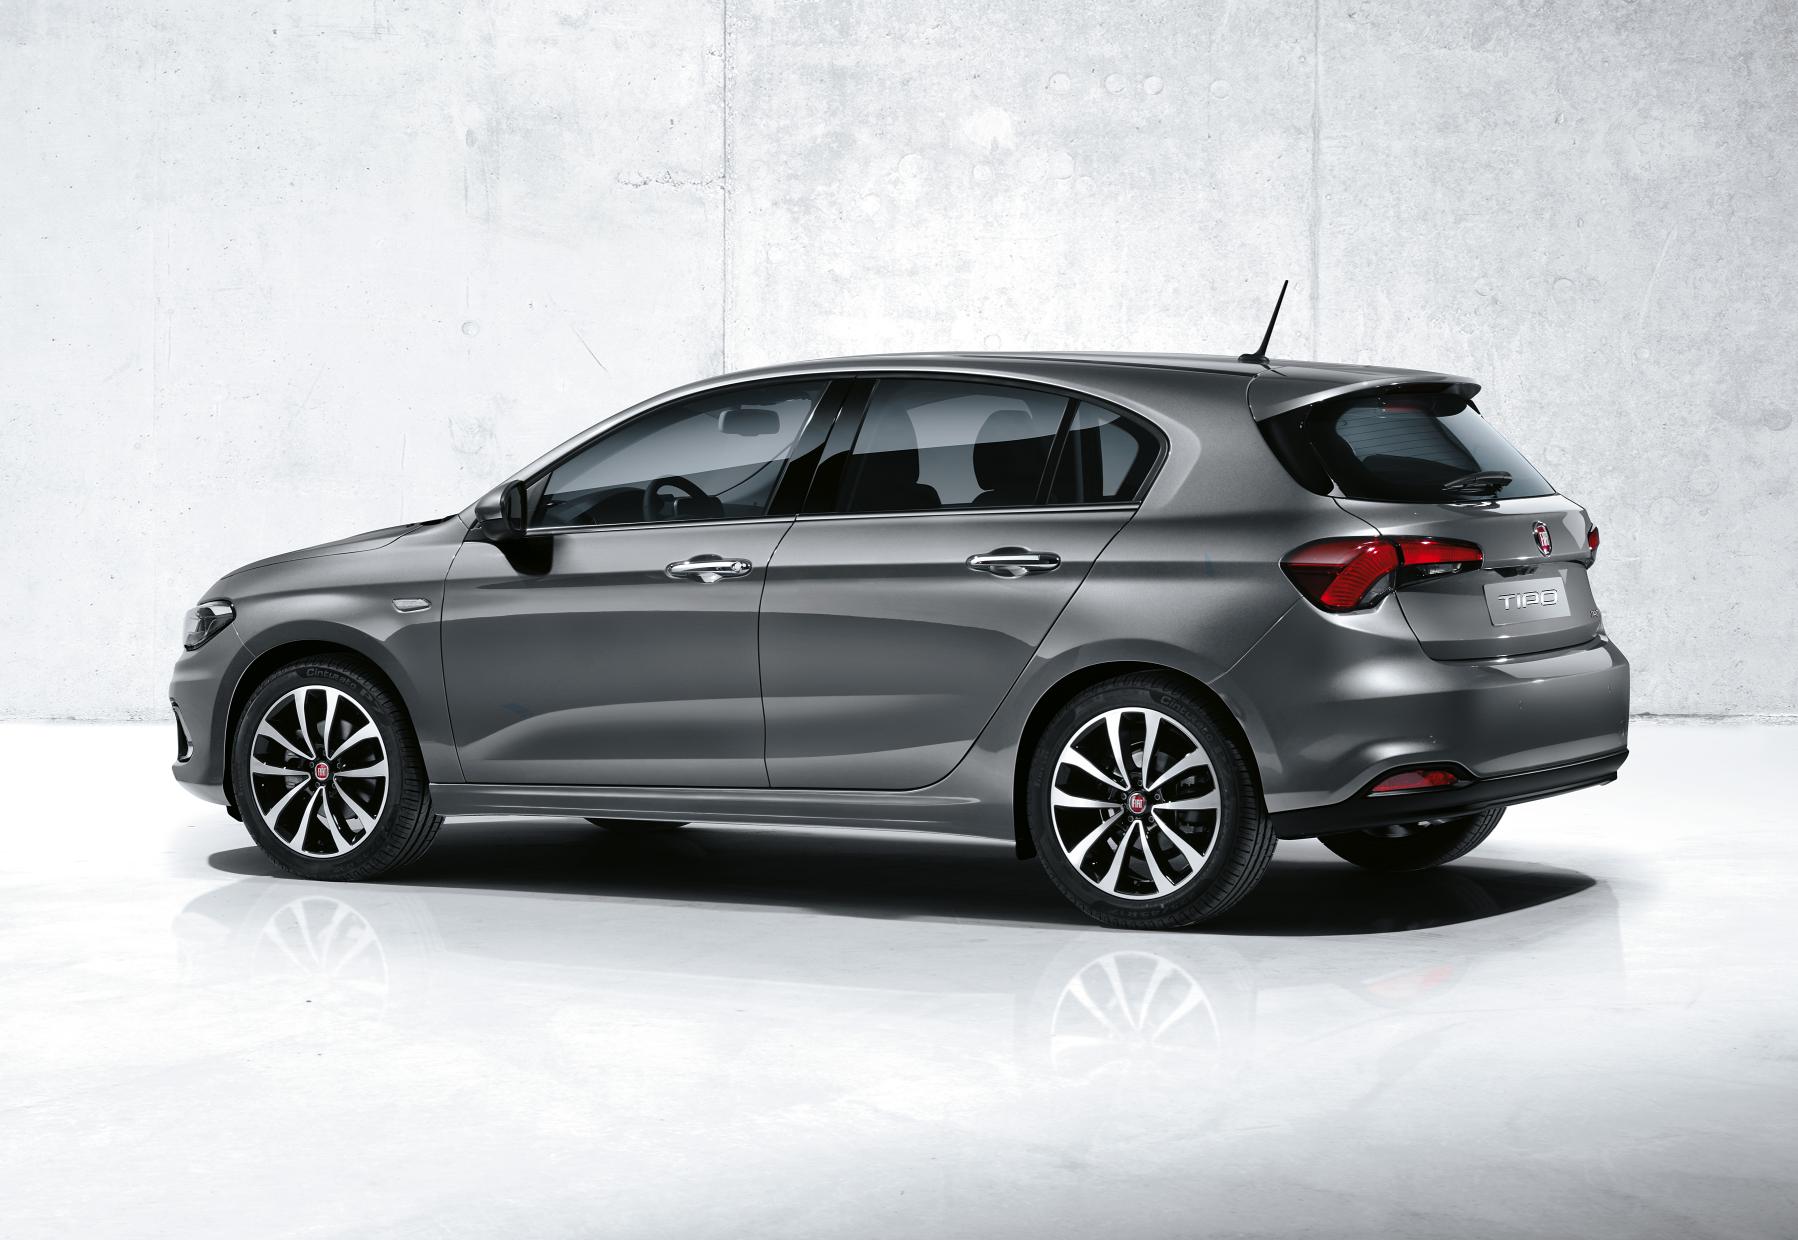 2016 Fiat Tipo Hatchback Priced at €12,750 in Italy, Station Wagon